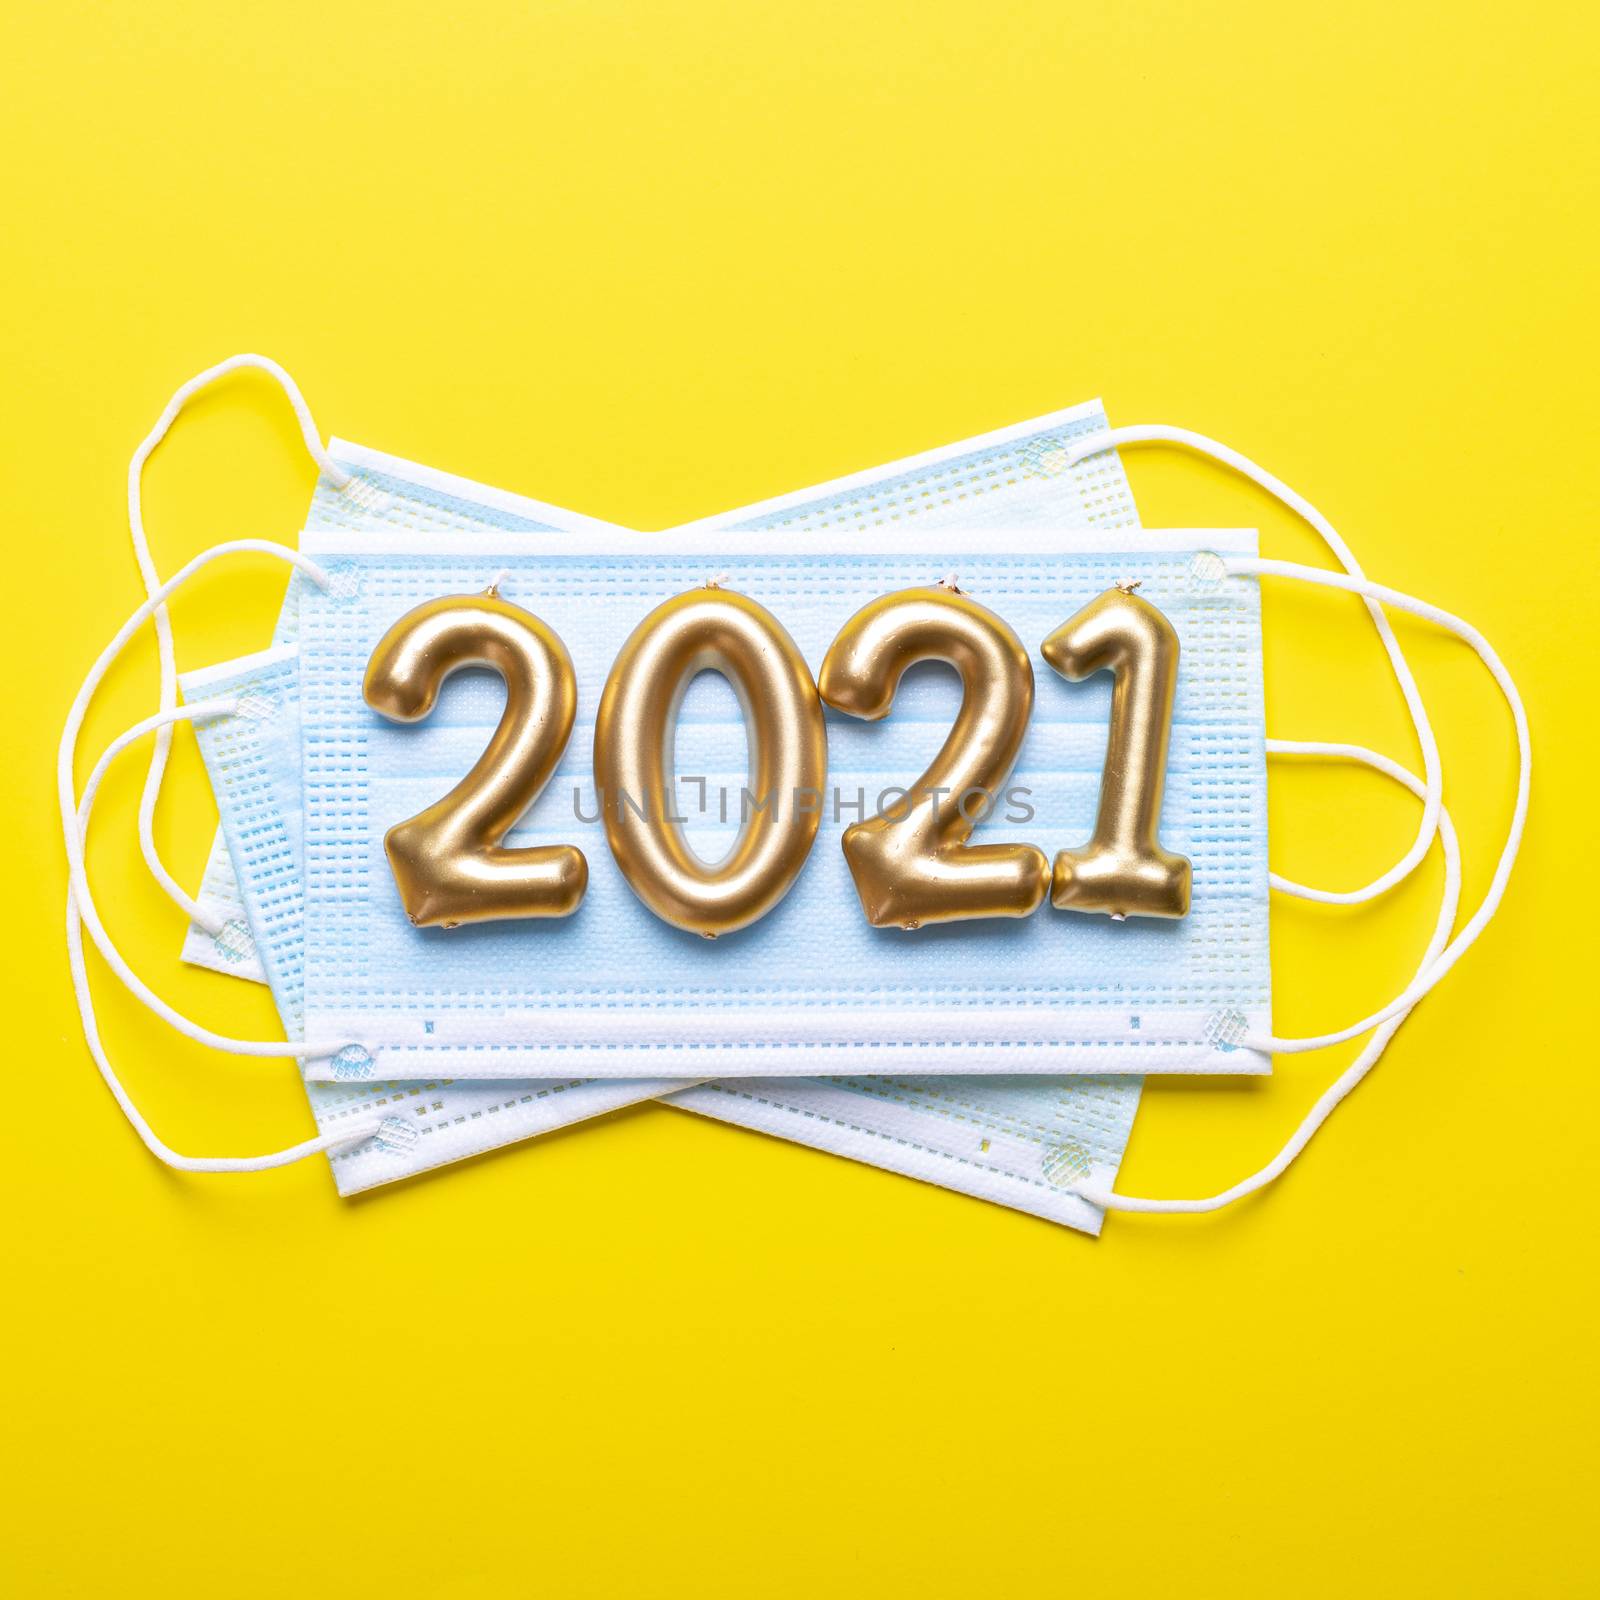 Gold numbers 2021 with face mask on yellow background. Happy new pandemic year